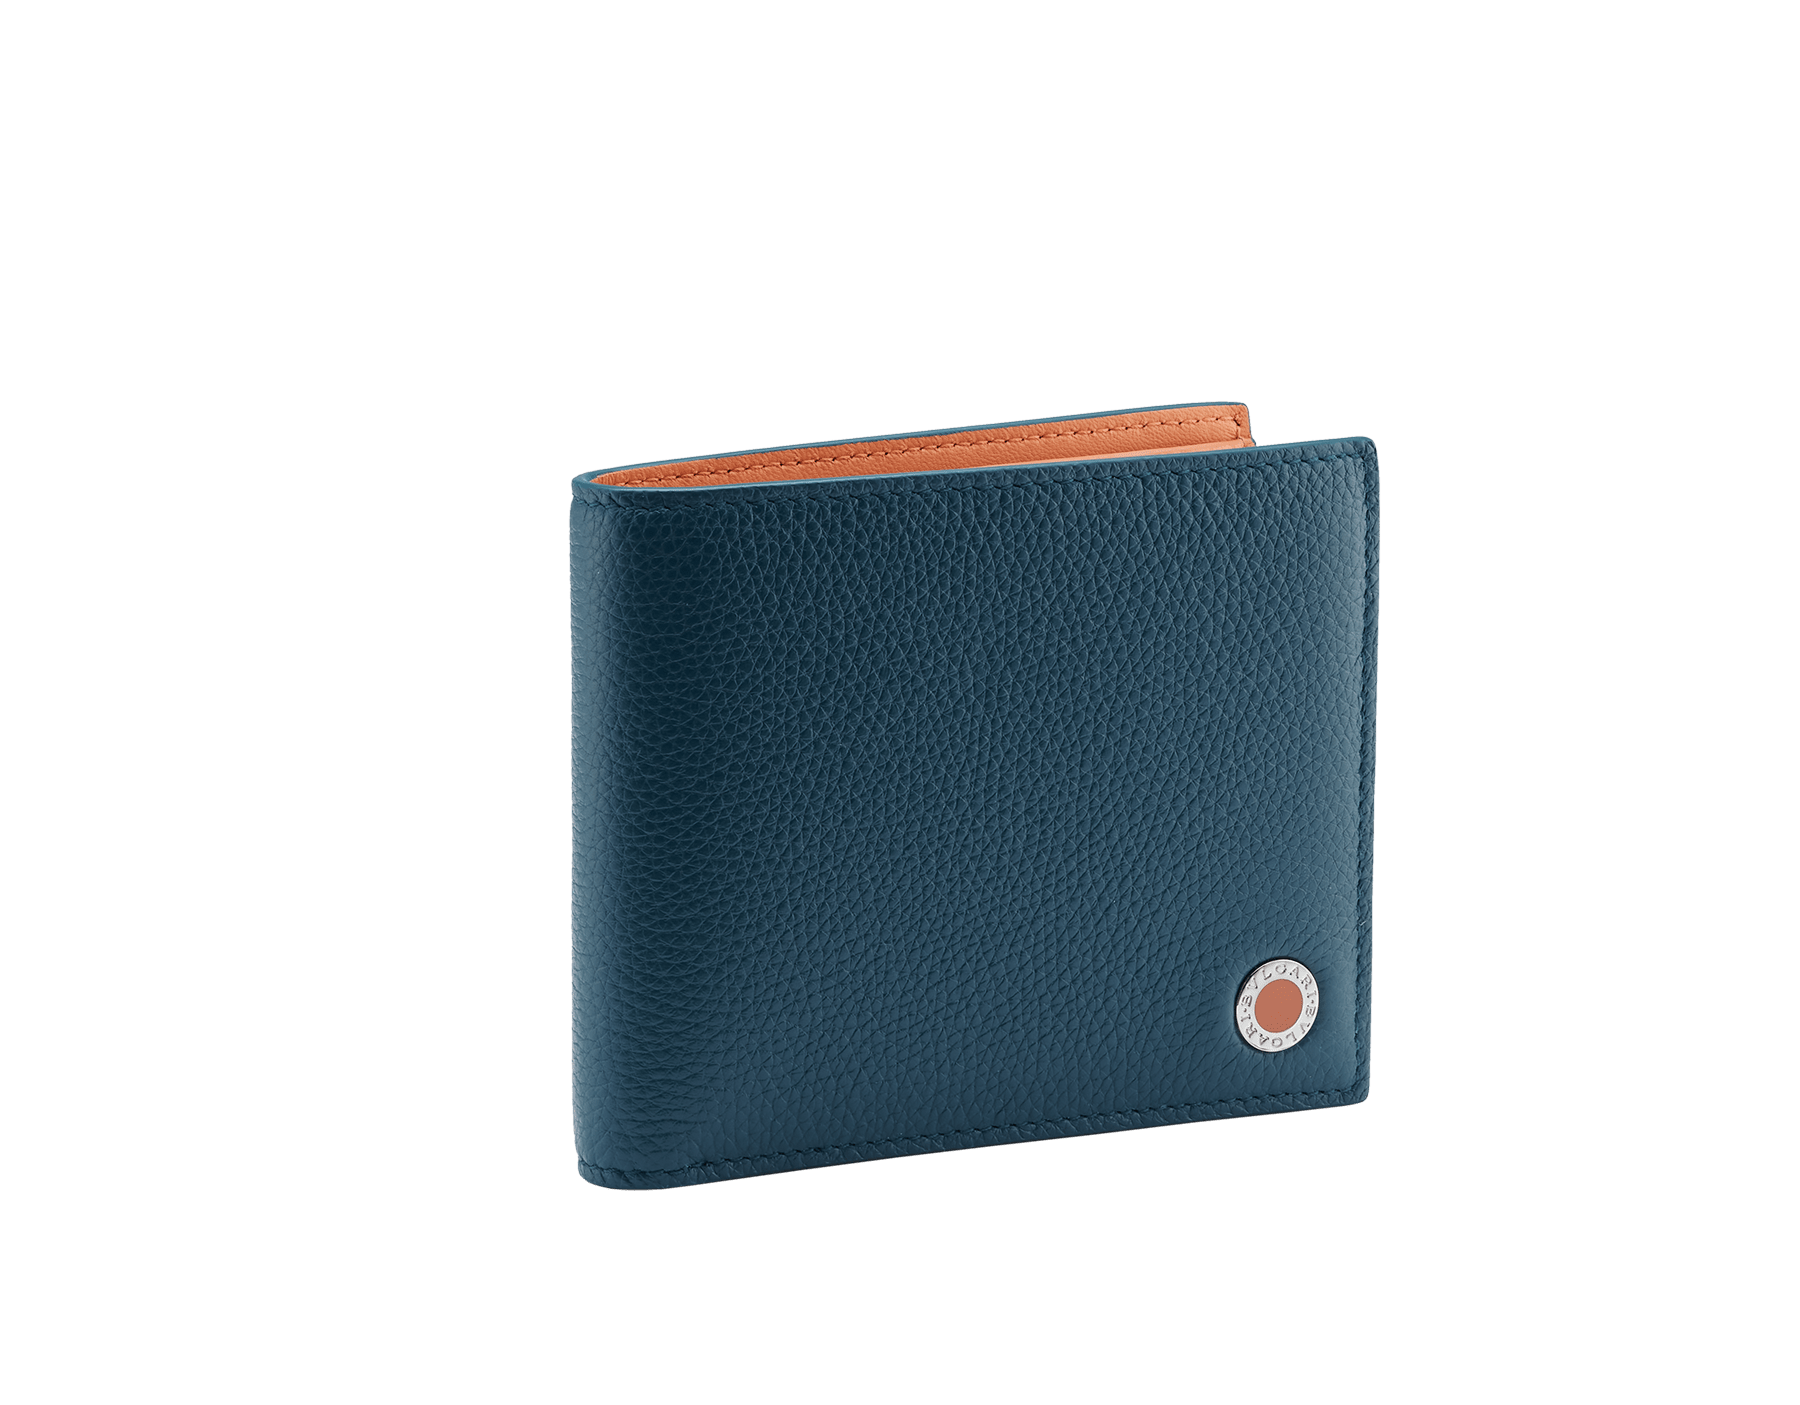 "BVLGARI BVLGARI" hipster compact wallet in denim sapphire soft full grain calf leather and capri turquoise calf leather. Iconic logo decoration in palladium plated brass coloured in capri turquoise enamel. BBM-WLT-HIPST-8C-SFGCL image 1